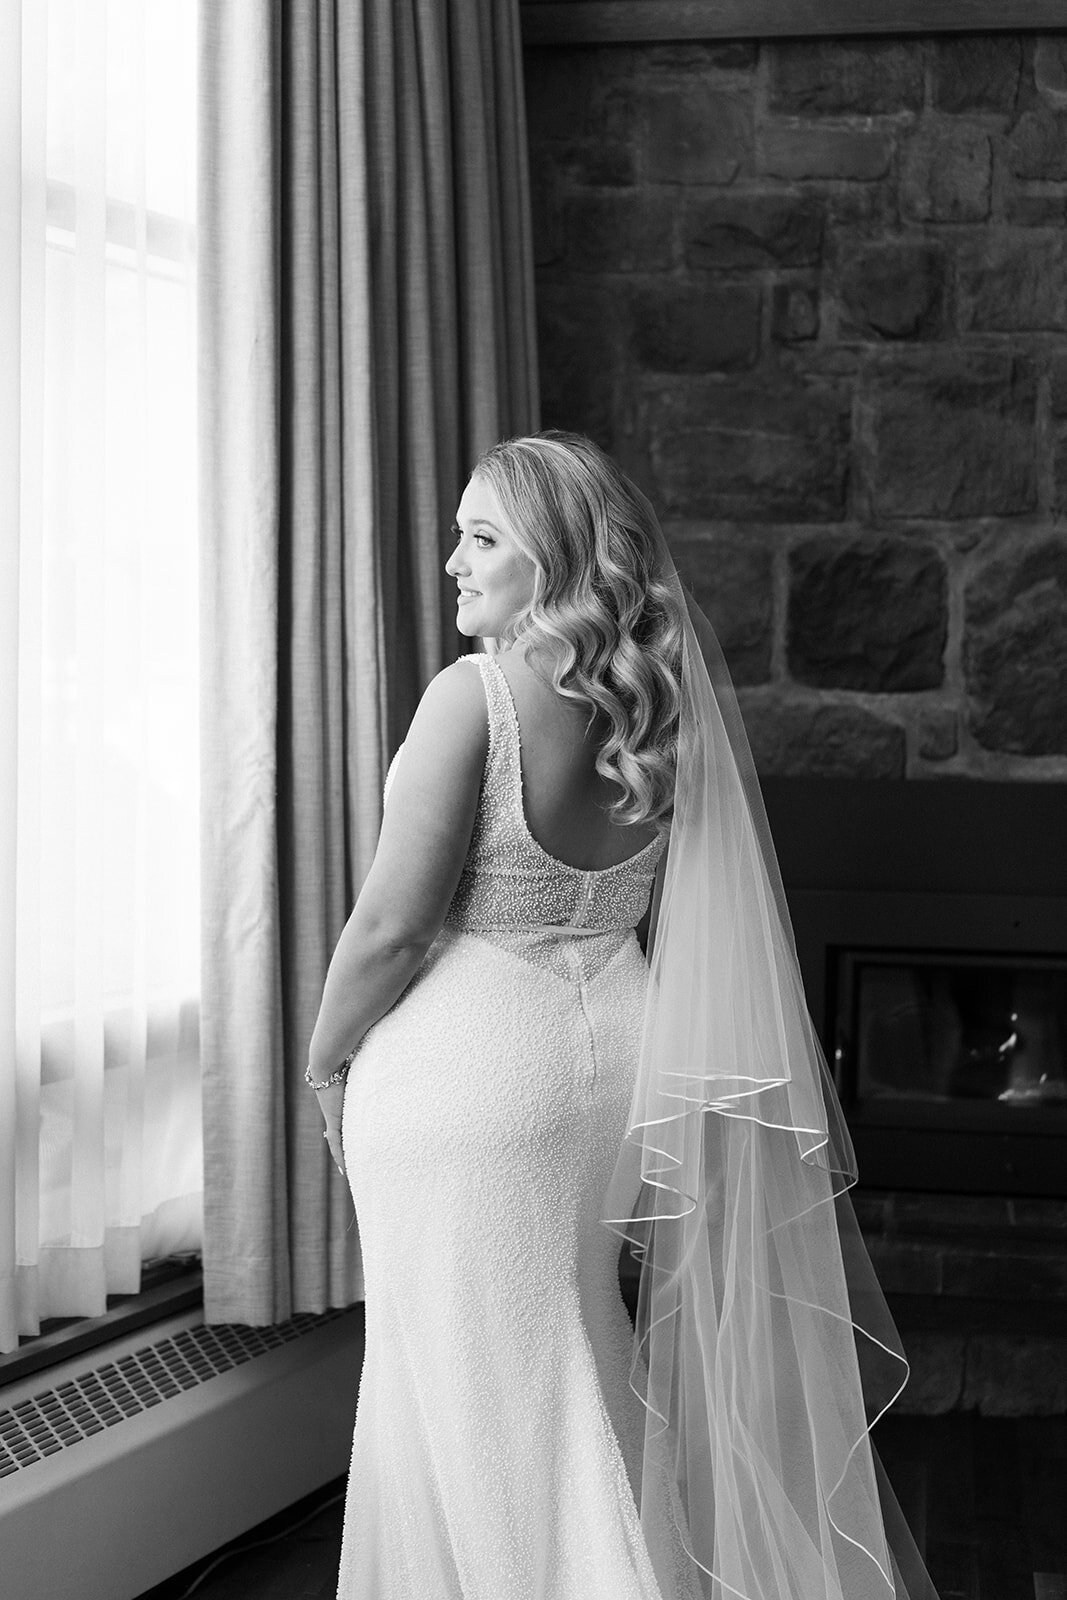 Black and white portrait of the bride in her wedding dress.